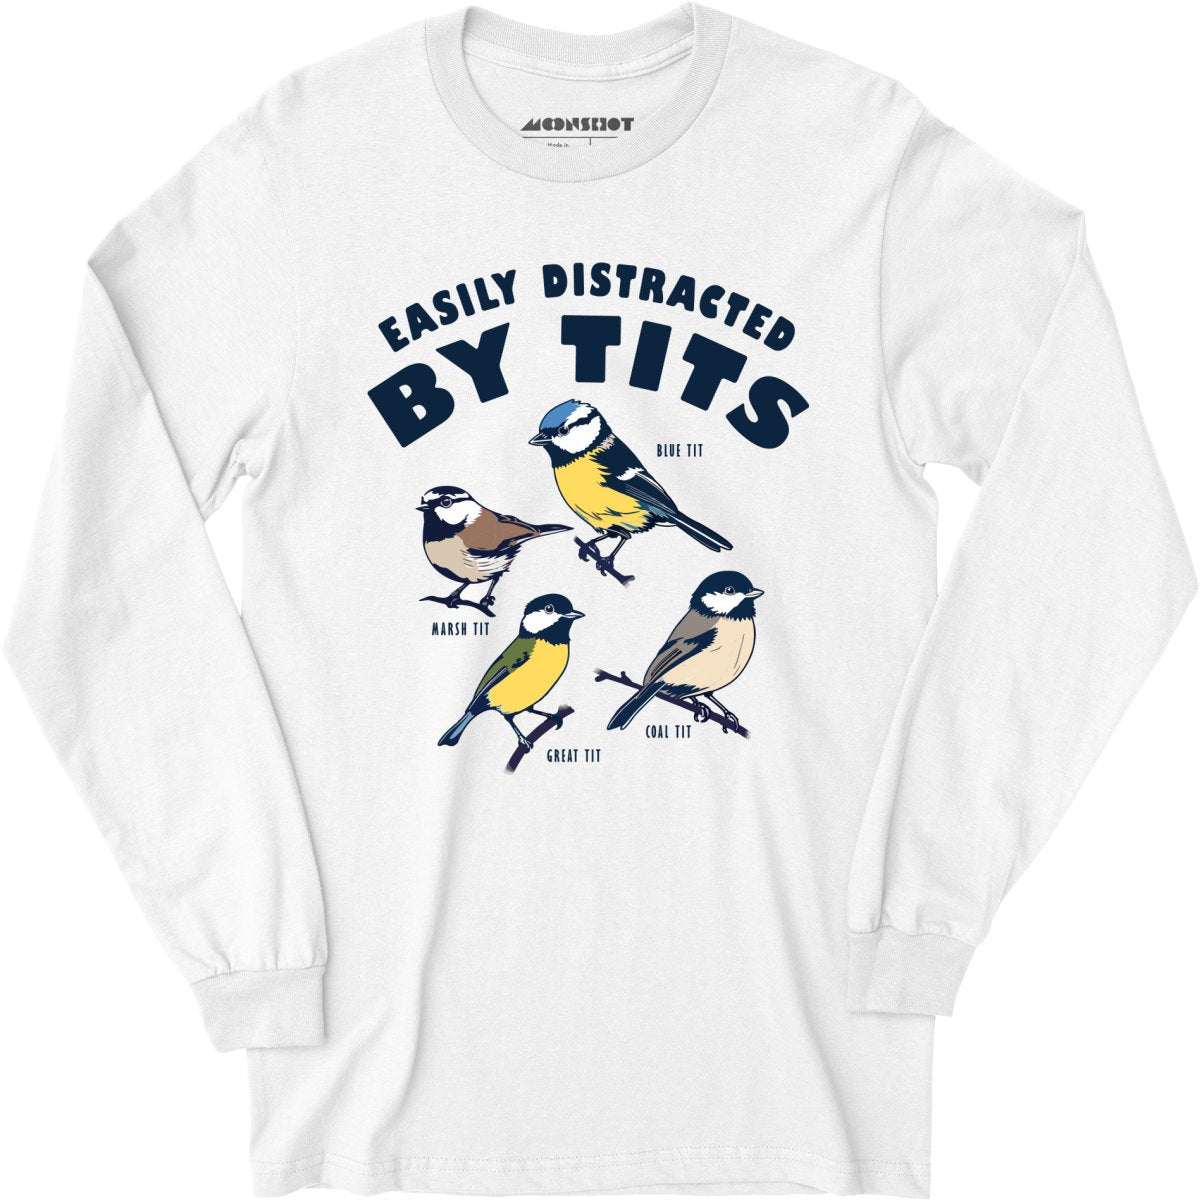 Easily Distracted Birds - Long Sleeve T-Shirt